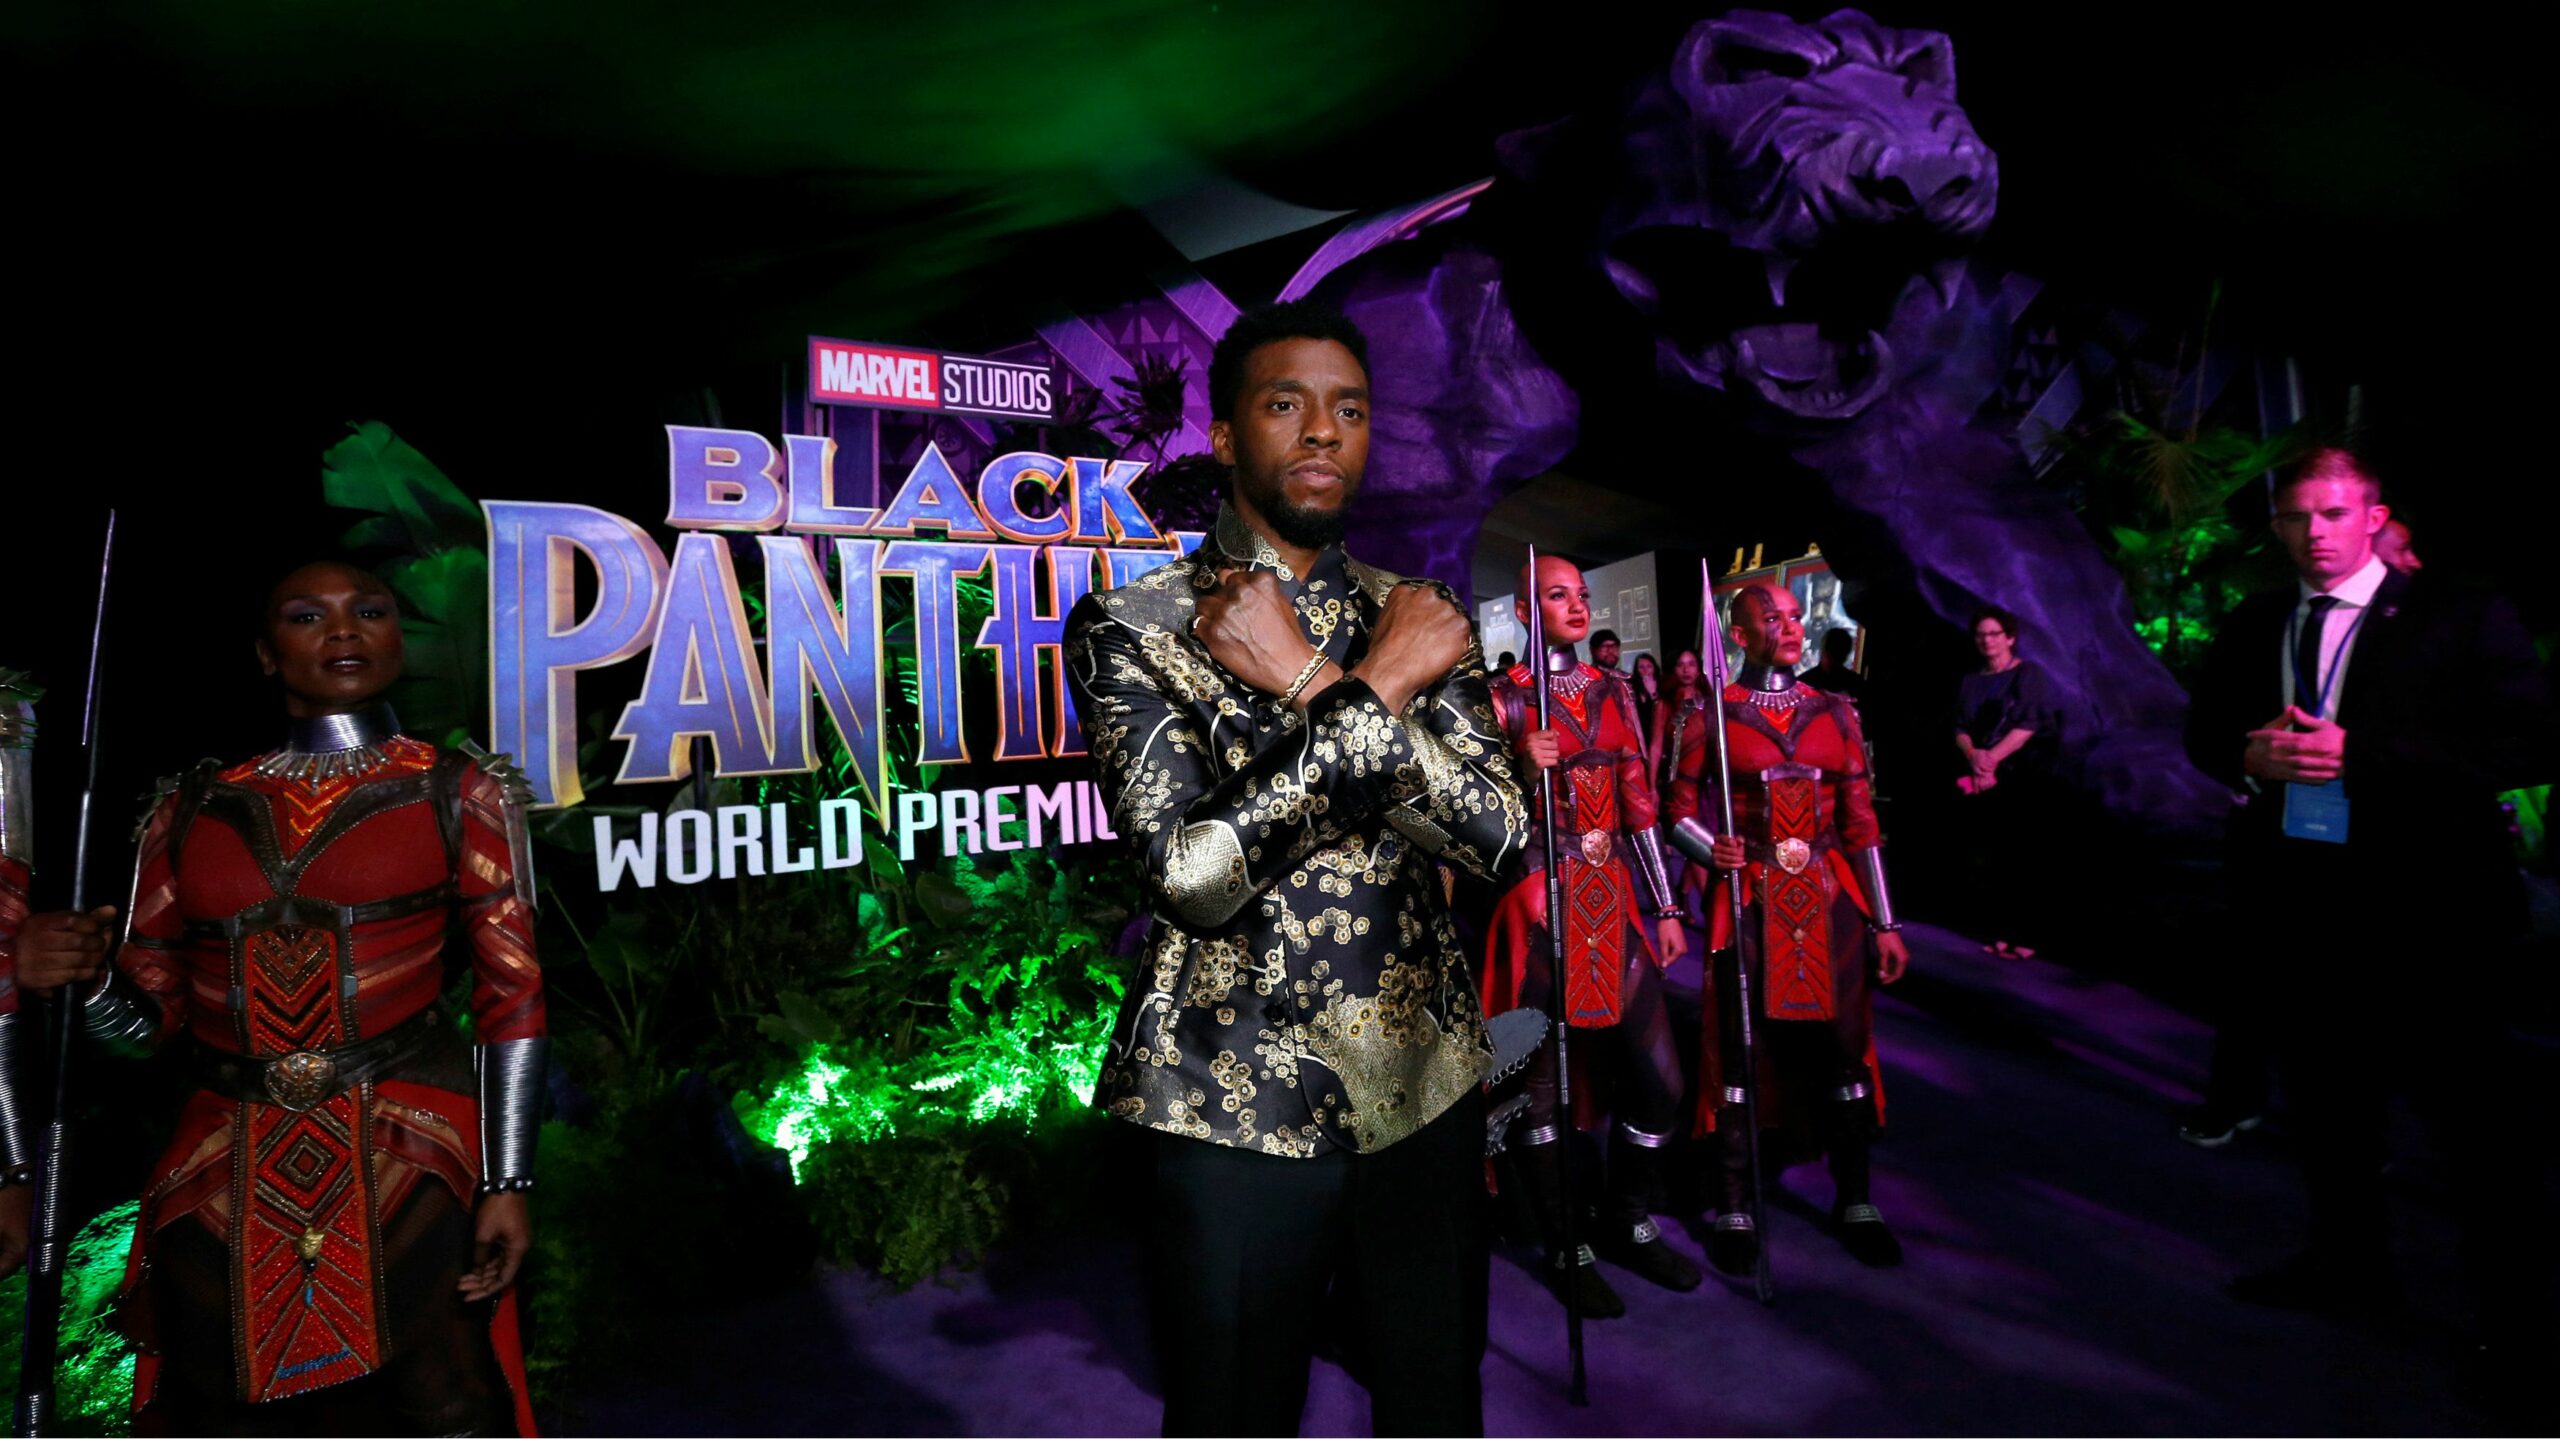 Cast member Chadwick Boseman poses at the premiere of Black Panther in Los Angeles